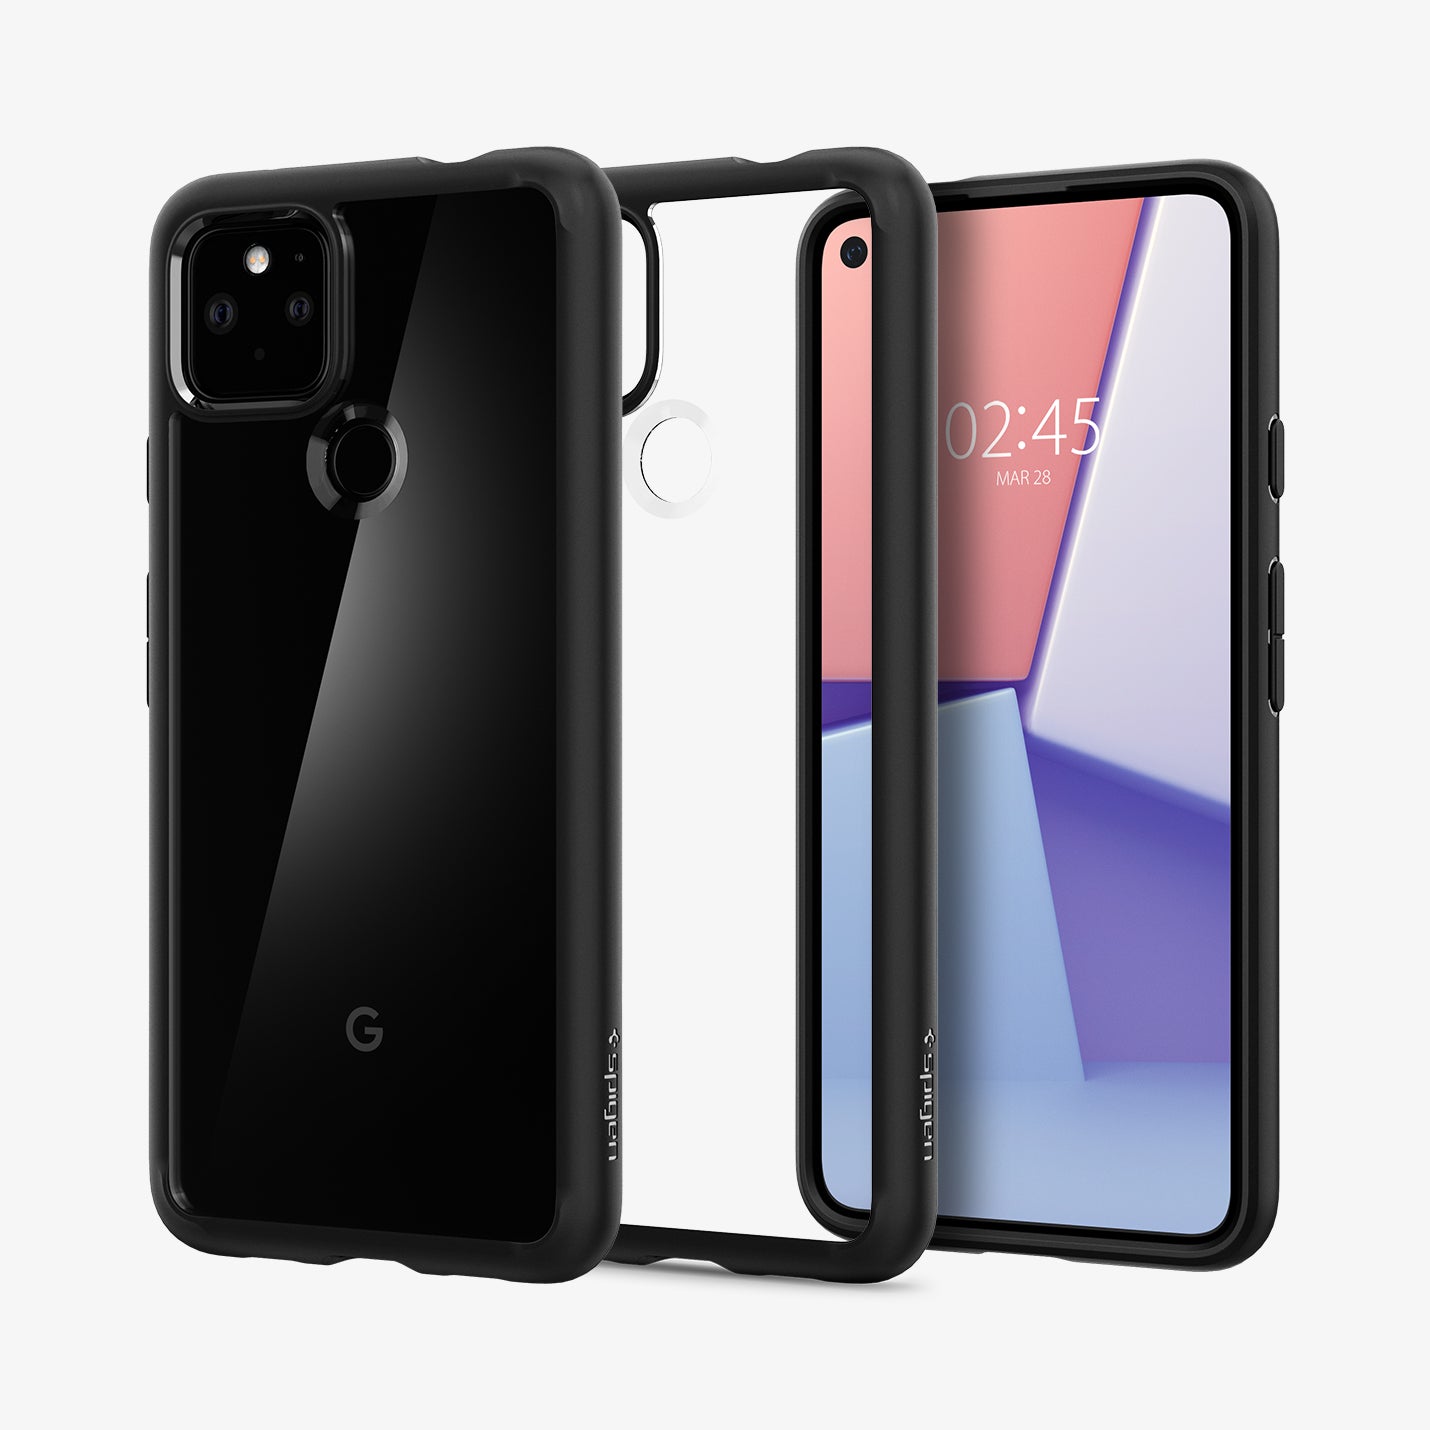 ACS01882 - Pixel 4a (5G) Case Ultra Hybrid in Matte Black showing the back, partial side, in the middle, a clear case with dark frame and next to it, a device showing front and partial side aligned with each other